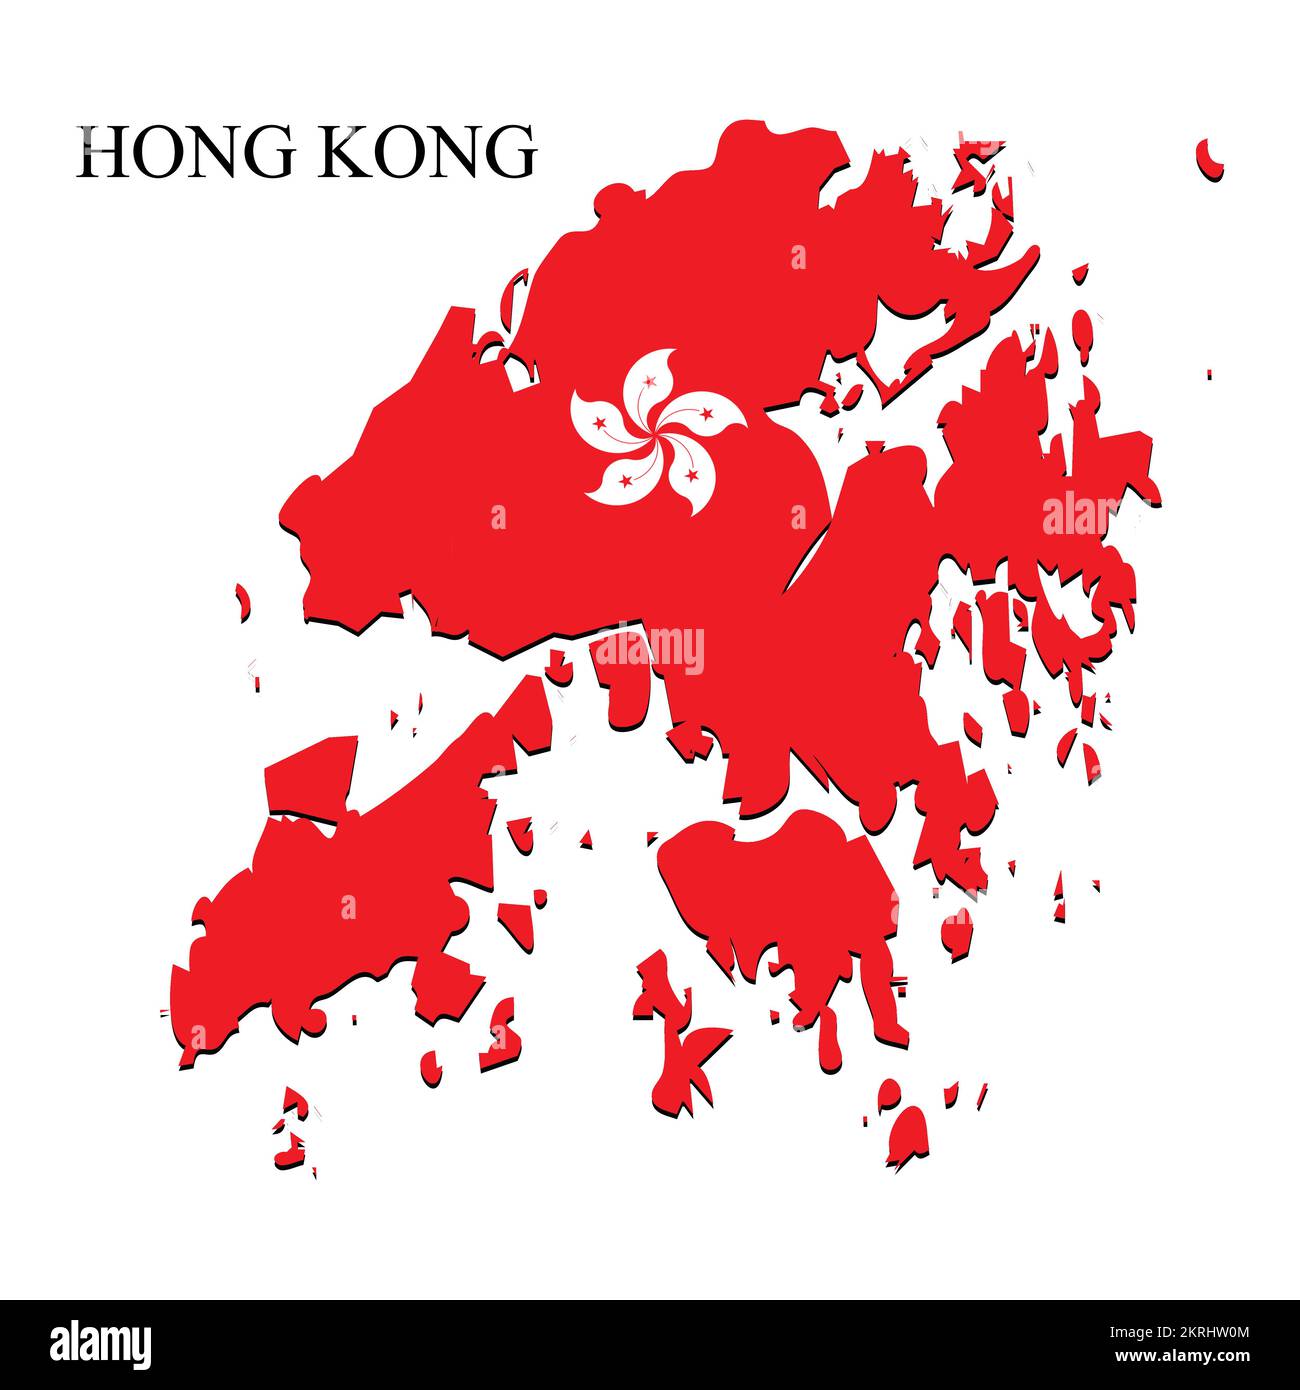 Hong Kong map vector illustration. Global economy. Famous country. China Region. Stock Vector